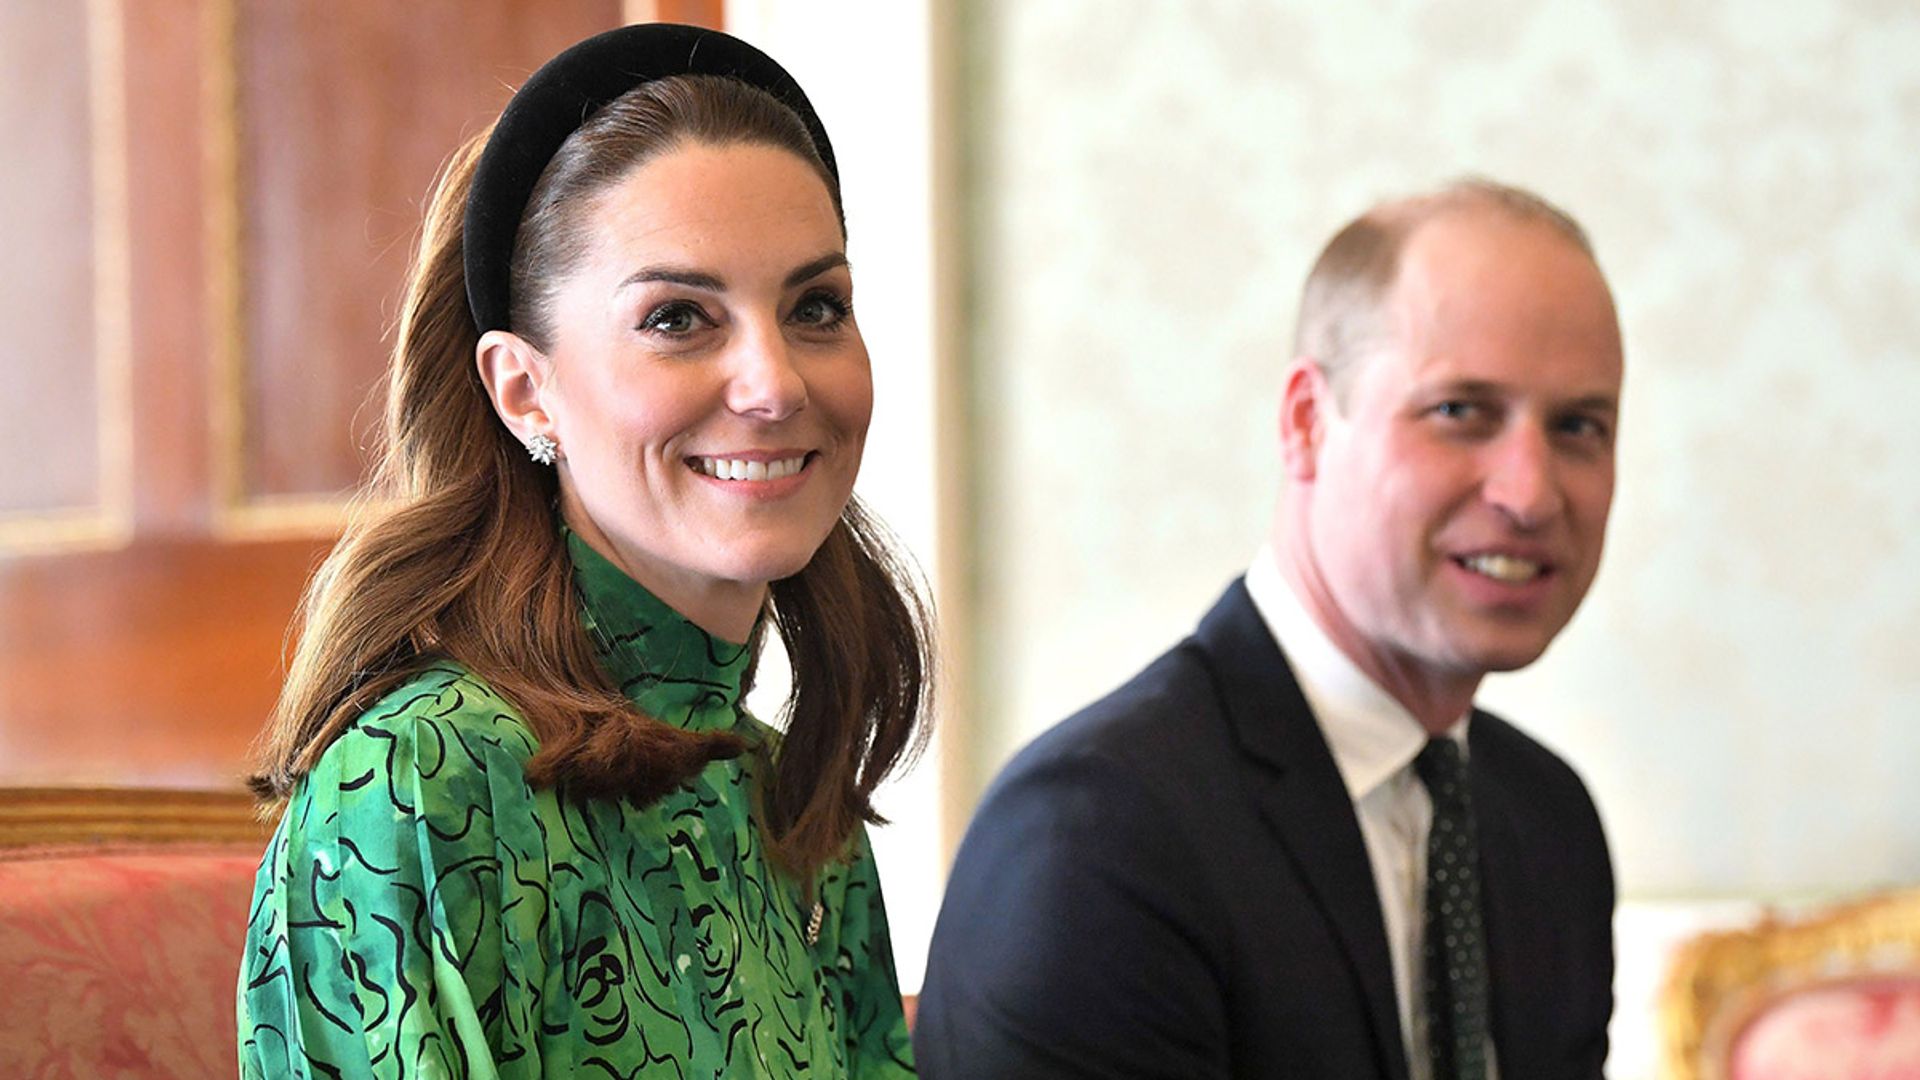 Kate Middleton pays subtle tribute to Ireland with her exquisite jewellery